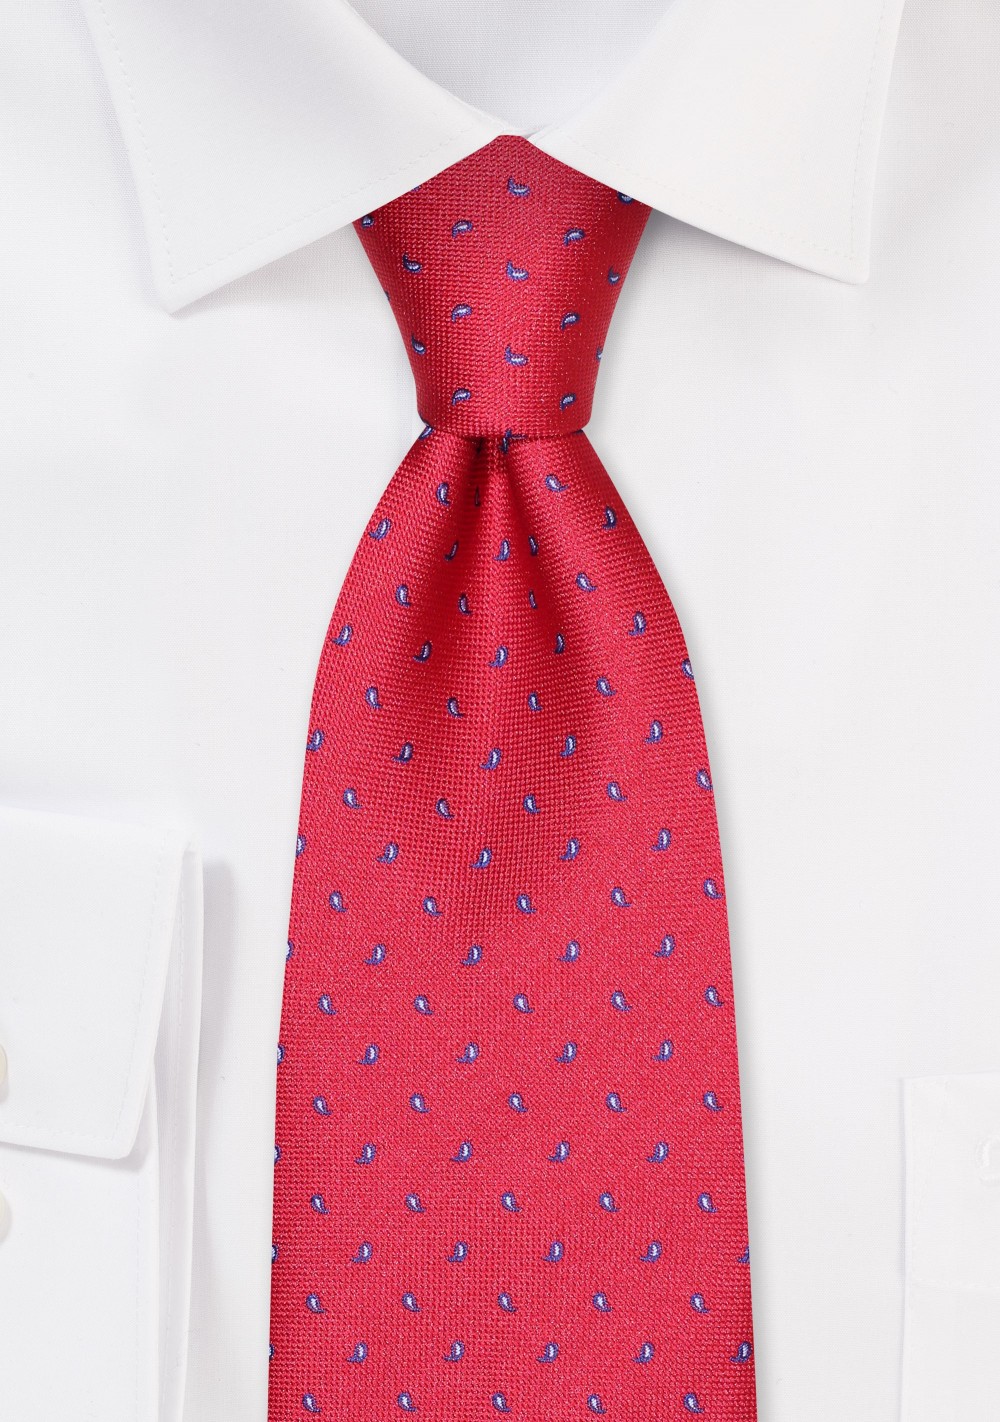 RED Tie with Woven Mini Paisleys in Blue